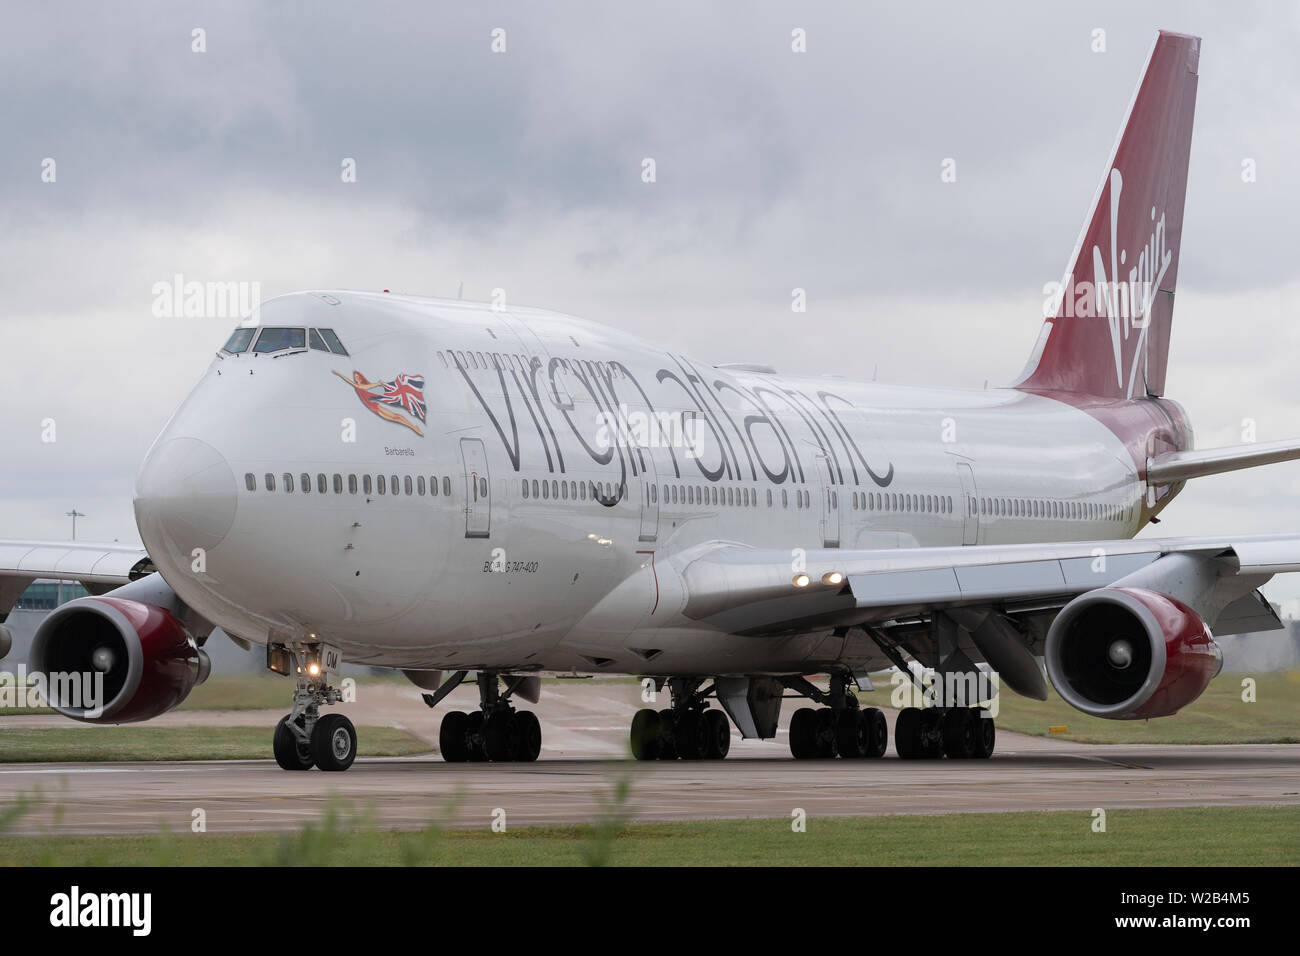 A Virgin Atlantic Boeing 747-400 taxis on the runway at Manchester Airport, UK. Stock Photo